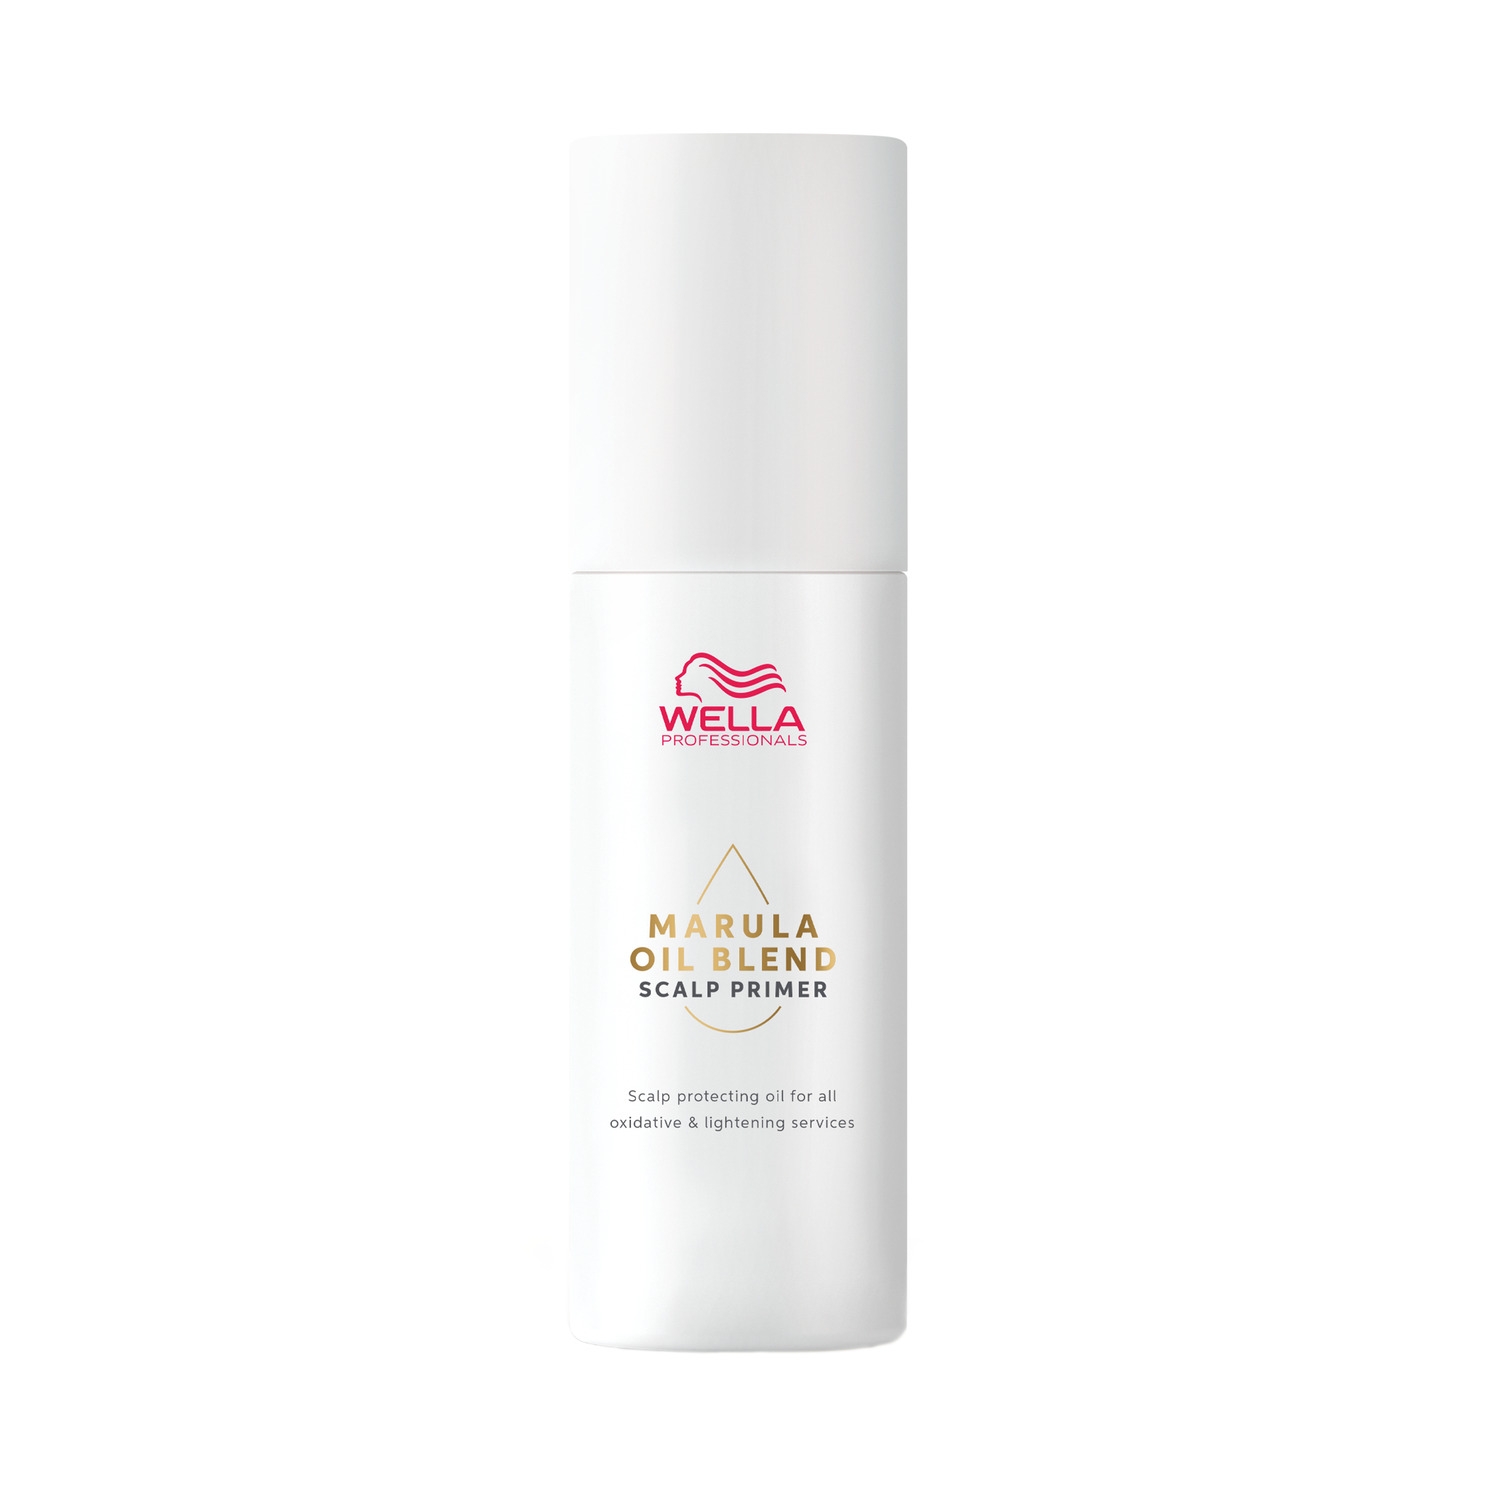 Product image from Wella Marula Oil Blend Scalp Primer